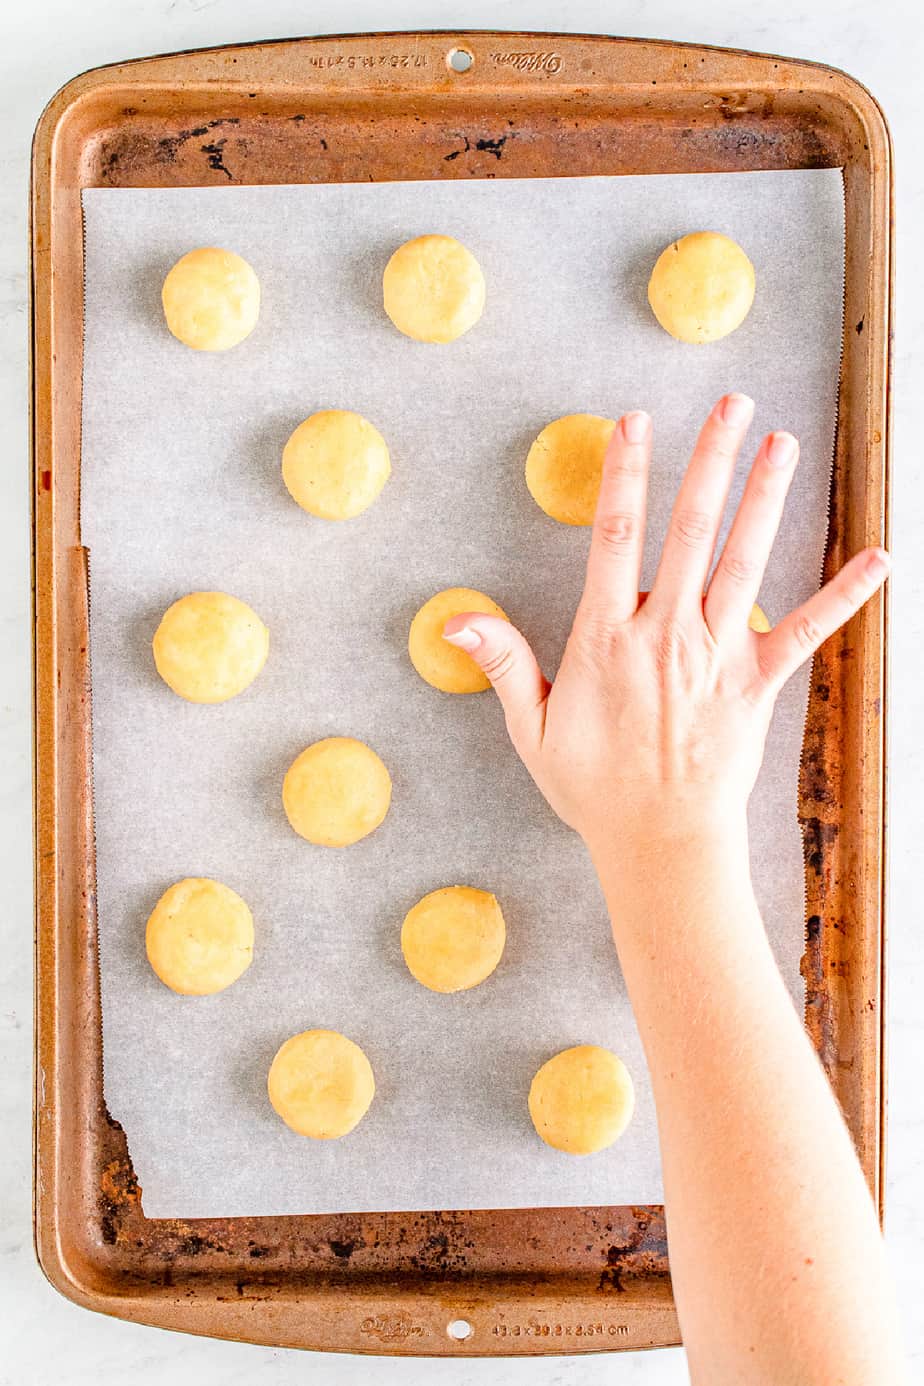 Hand pressing the tops of eggnog cookies to flatten the dough balls on a baking pan